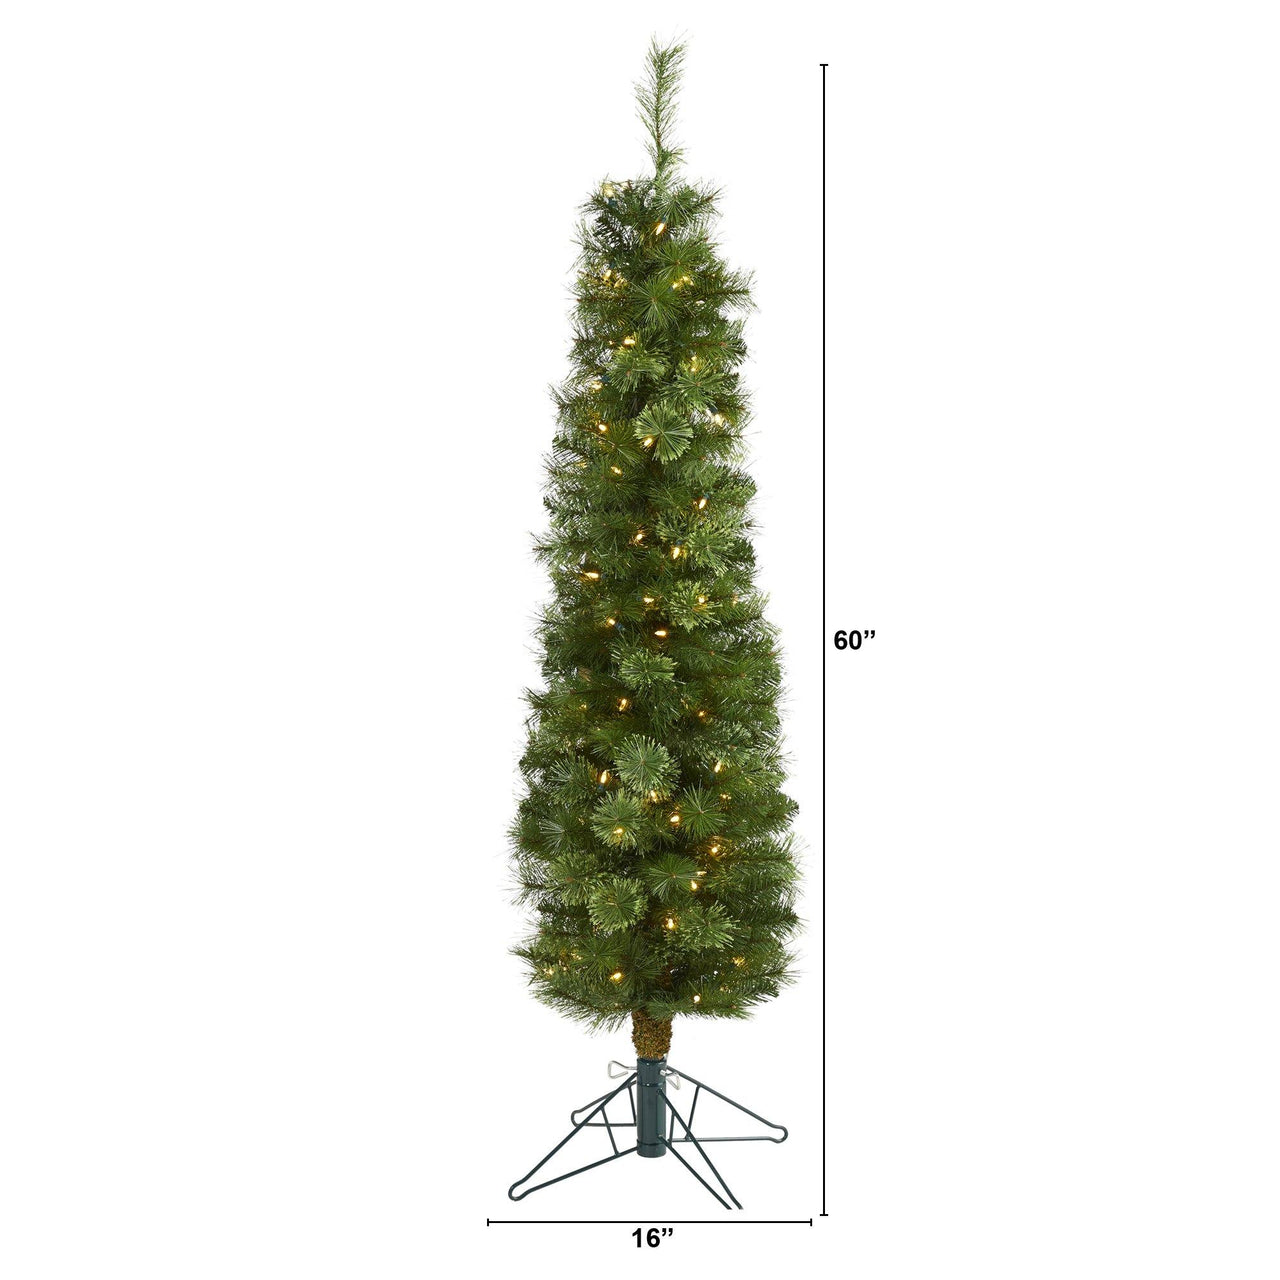 5' Green Pencil Artificial Christmas Tree with 100 Clear (Multifunction) LED Lights and 198 Bendable Branches - The Fox Decor